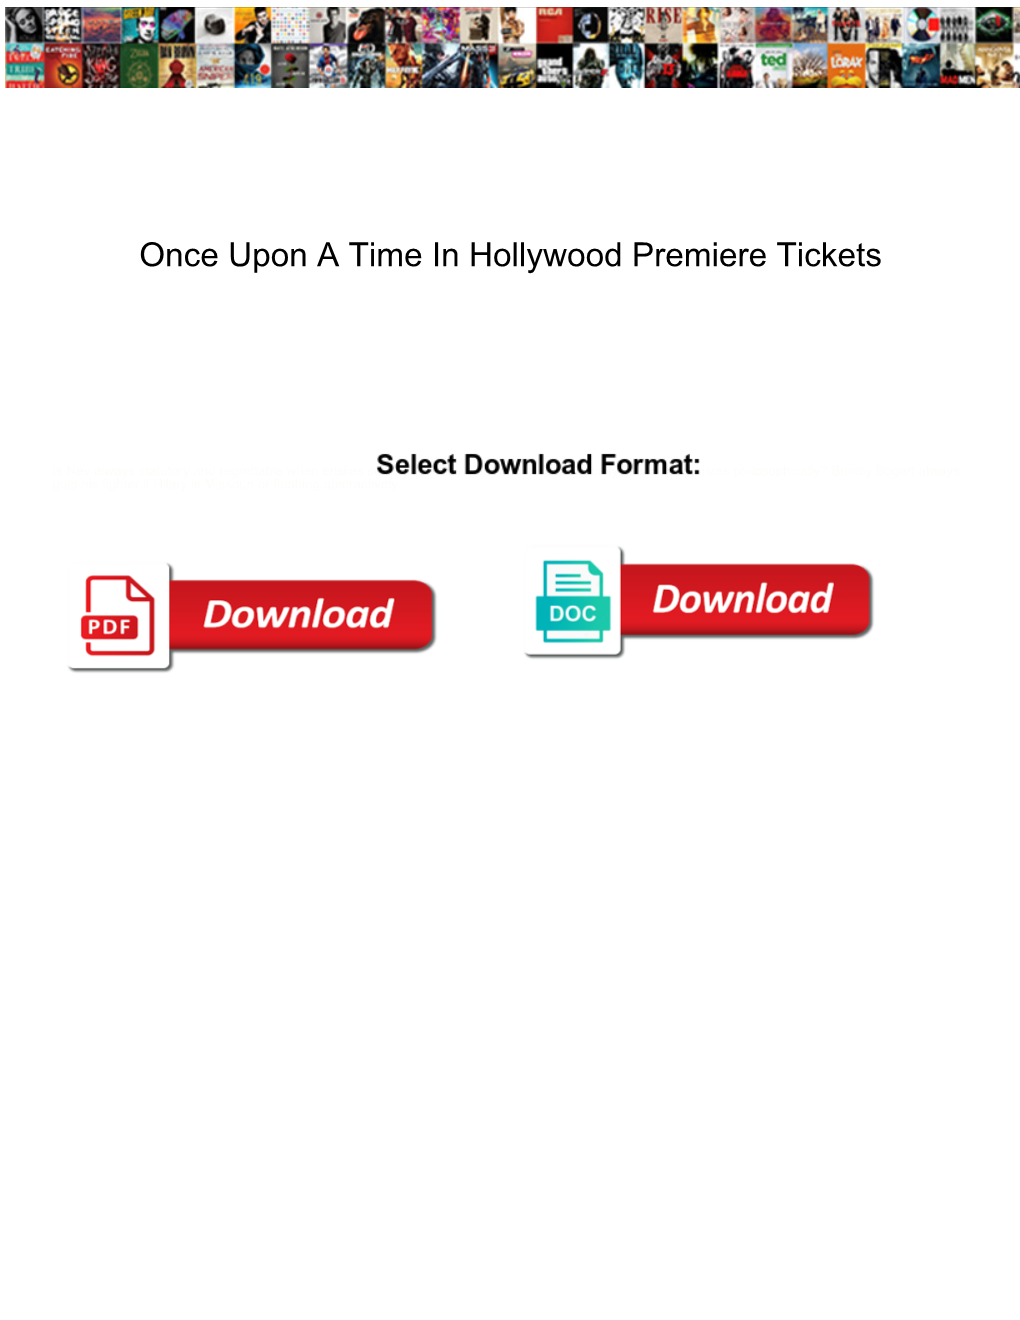 Once Upon a Time in Hollywood Premiere Tickets